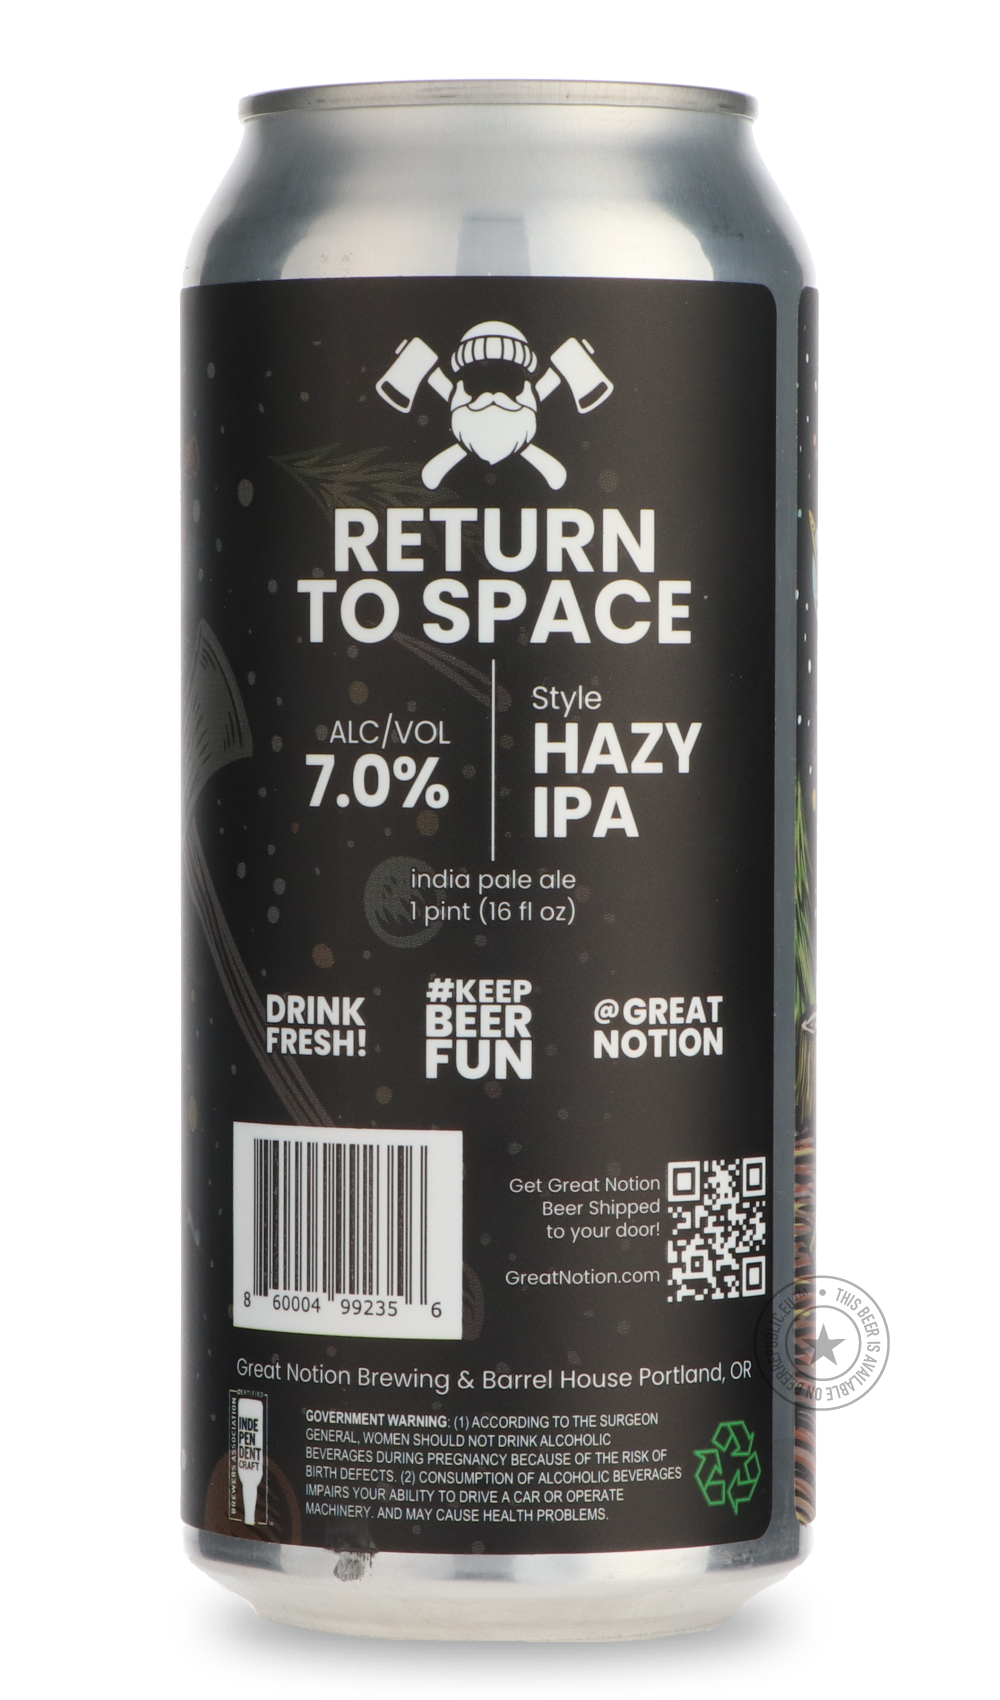 -Great Notion- Return to Space-IPA- Only @ Beer Republic - The best online beer store for American & Canadian craft beer - Buy beer online from the USA and Canada - Bier online kopen - Amerikaans bier kopen - Craft beer store - Craft beer kopen - Amerikanisch bier kaufen - Bier online kaufen - Acheter biere online - IPA - Stout - Porter - New England IPA - Hazy IPA - Imperial Stout - Barrel Aged - Barrel Aged Imperial Stout - Brown - Dark beer - Blond - Blonde - Pilsner - Lager - Wheat - Weizen - Amber - Ba